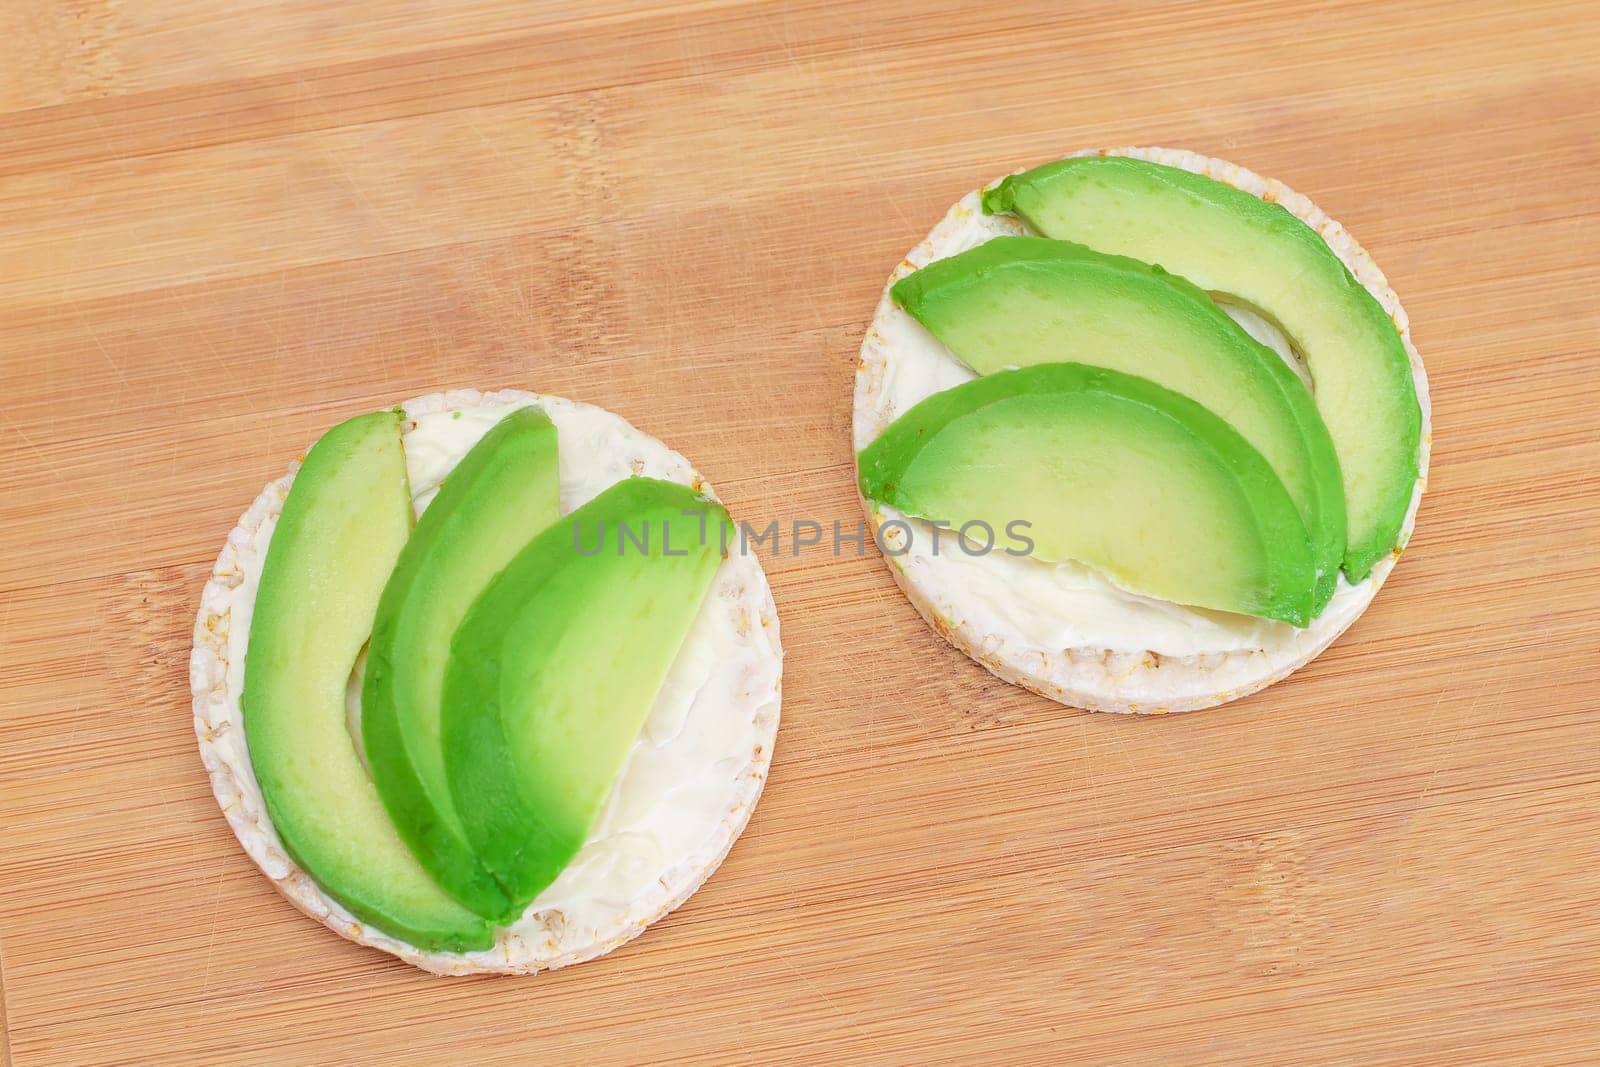 Rice Cake Sandwiches with Fresh Avocado and Cream Cheese on Bamboo Cutting Board. Easy Breakfast. Diet Food. Quick and Healthy Sandwiches. Crispbread with Tasty Filling. Healthy Dietary Snack